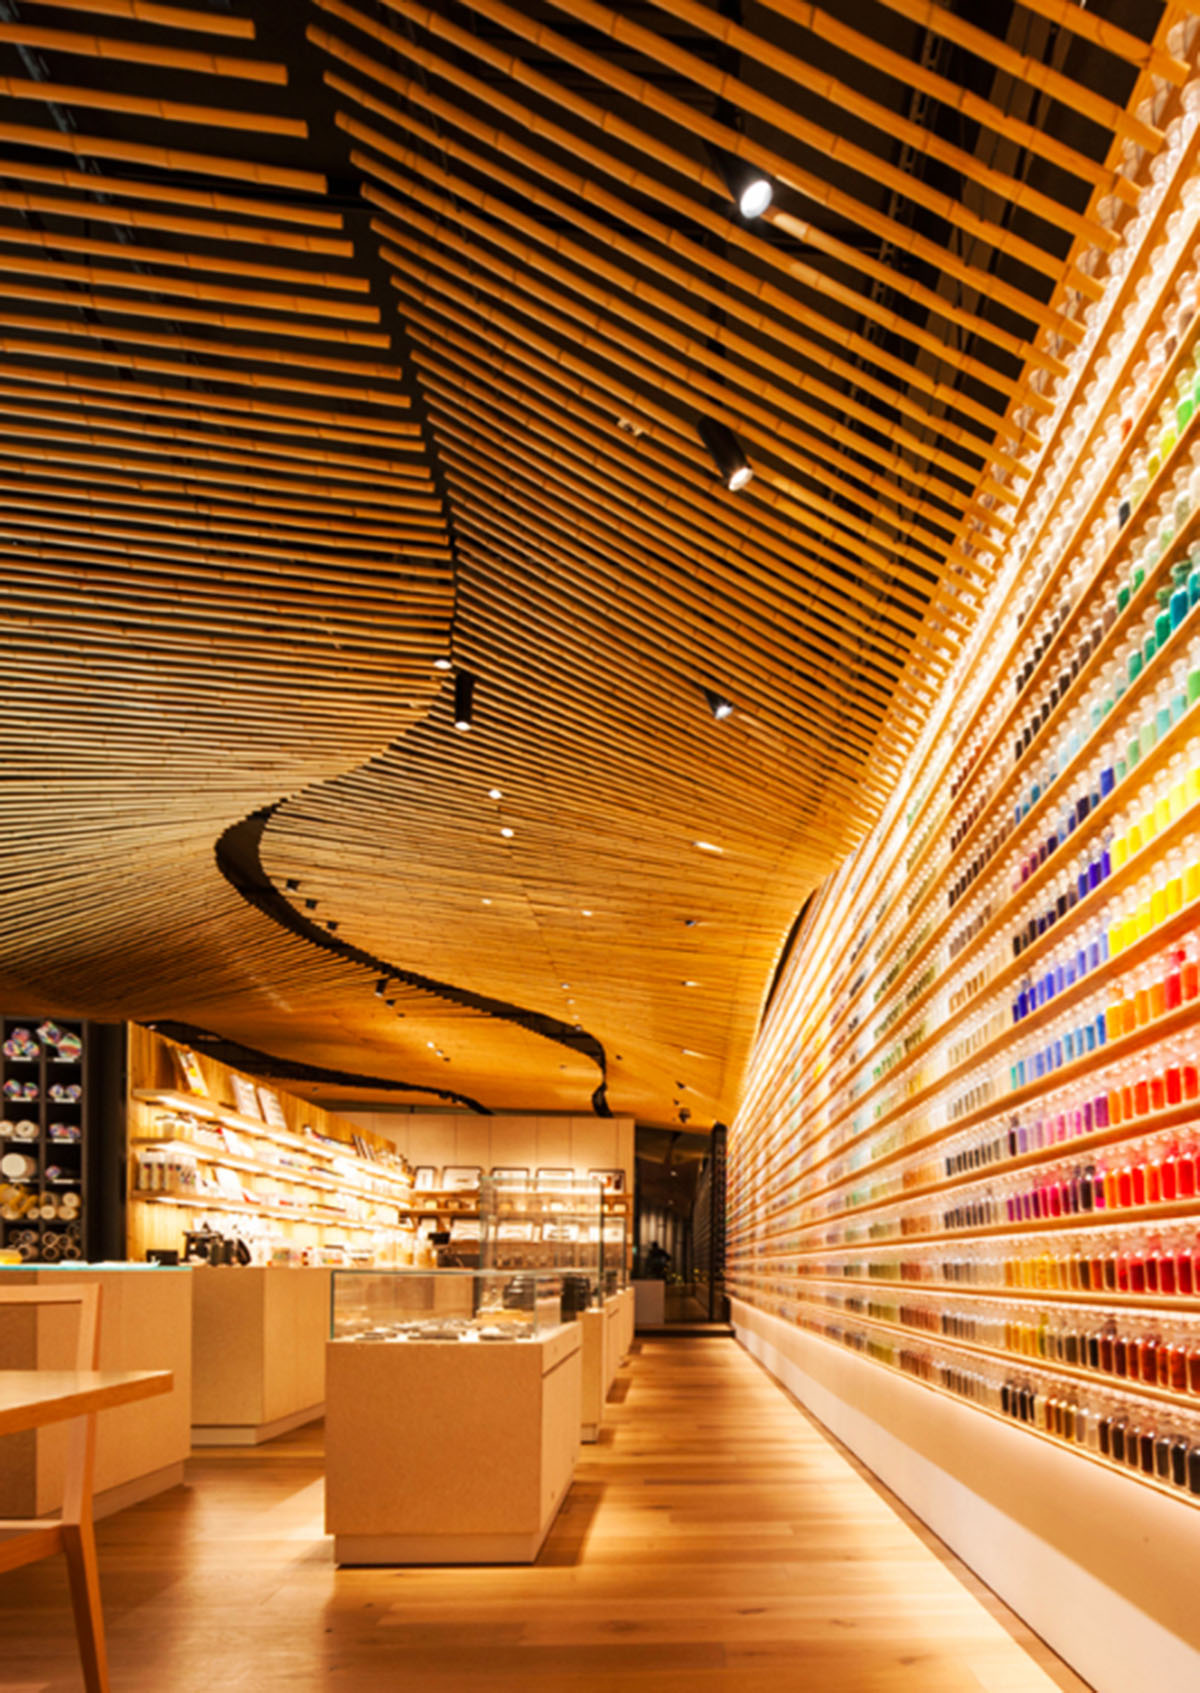 Kengo Kuma designed a wave of bamboo for the interior of ’Pigment’ shop ...